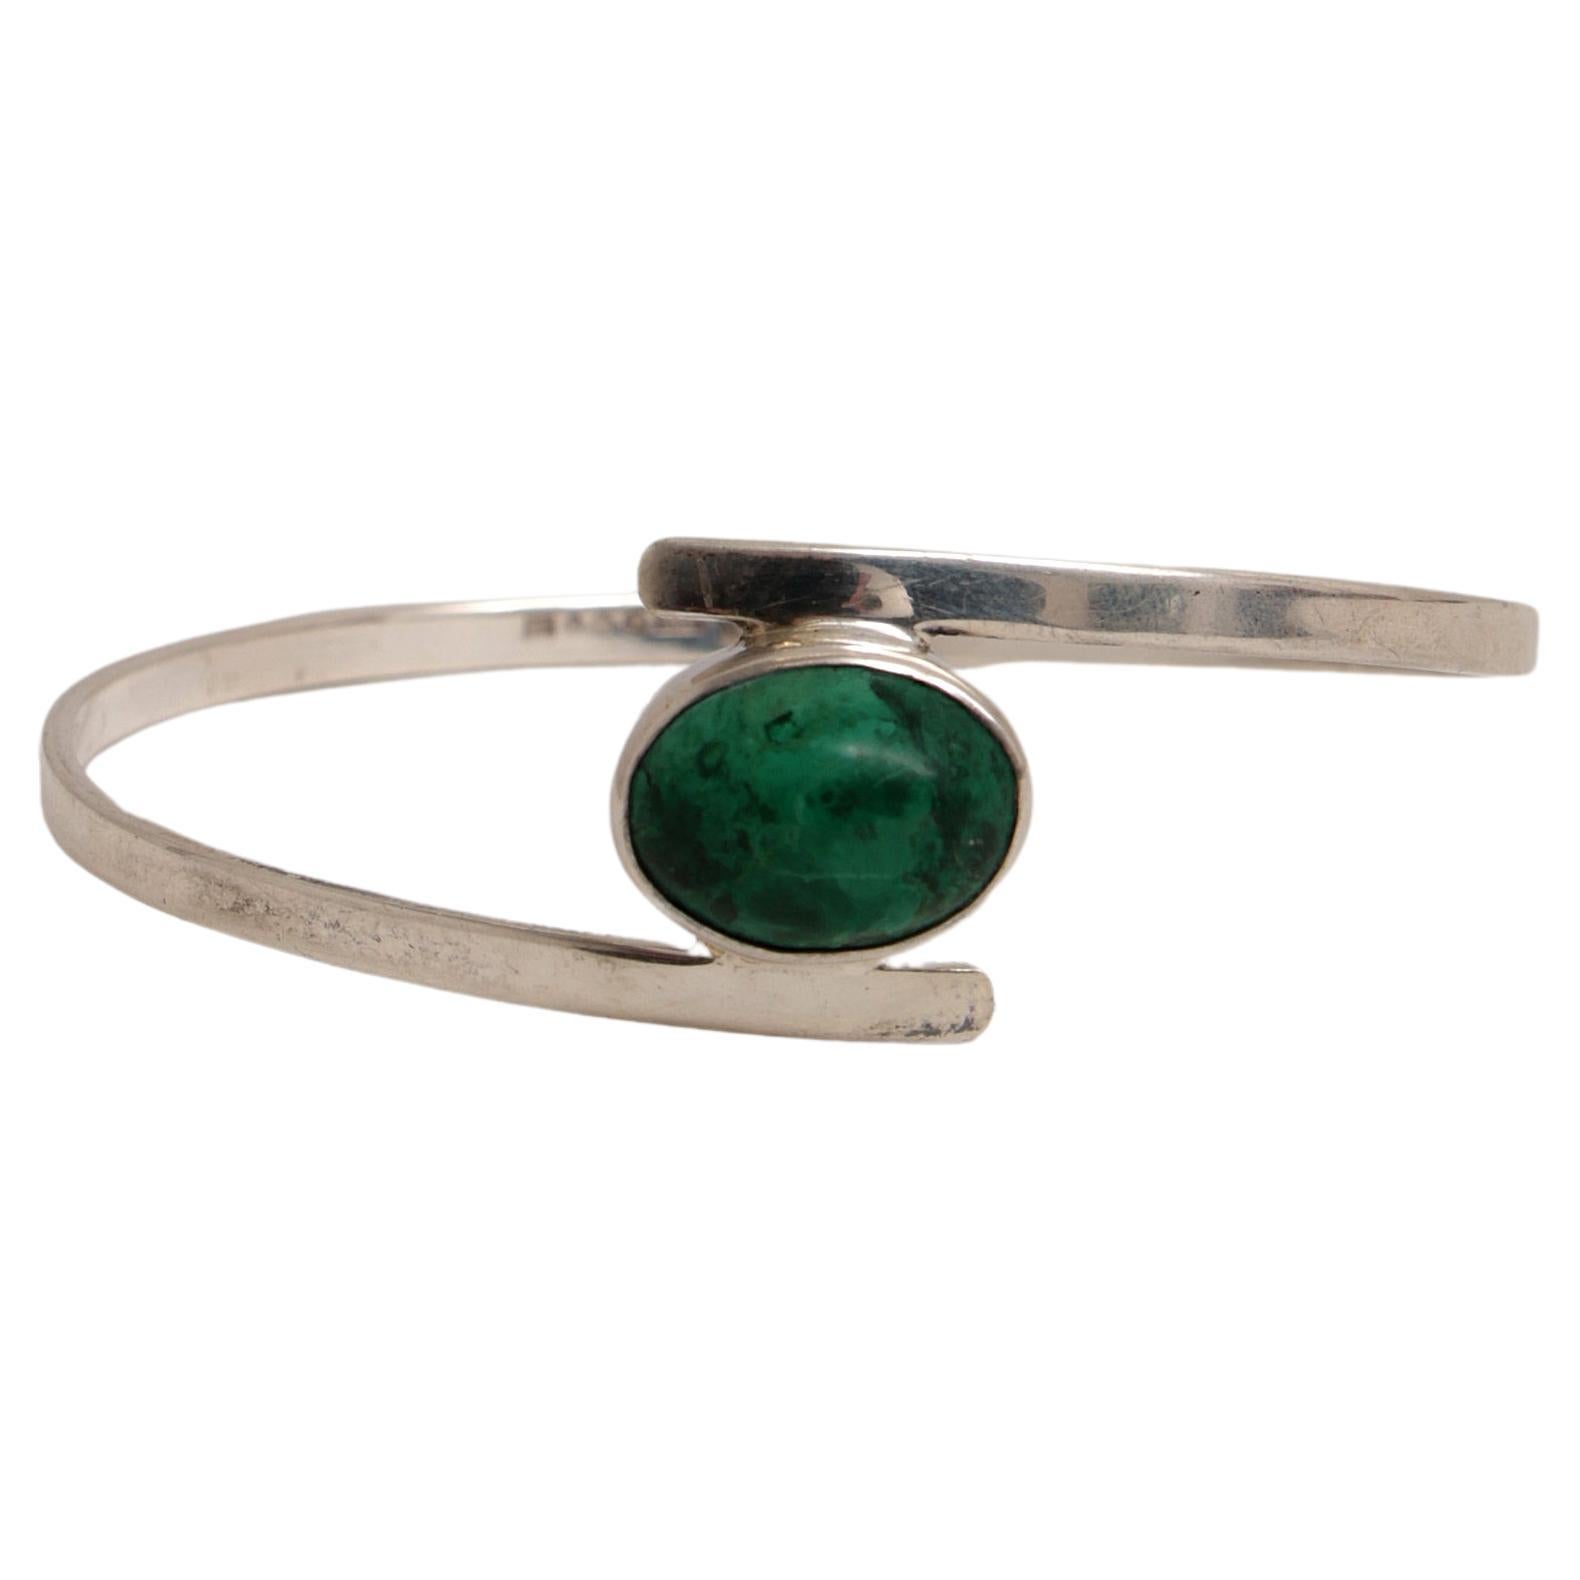 Scandinavian Modern Sterling Silver bracelet by Isaac Cohen with green stone. For Sale